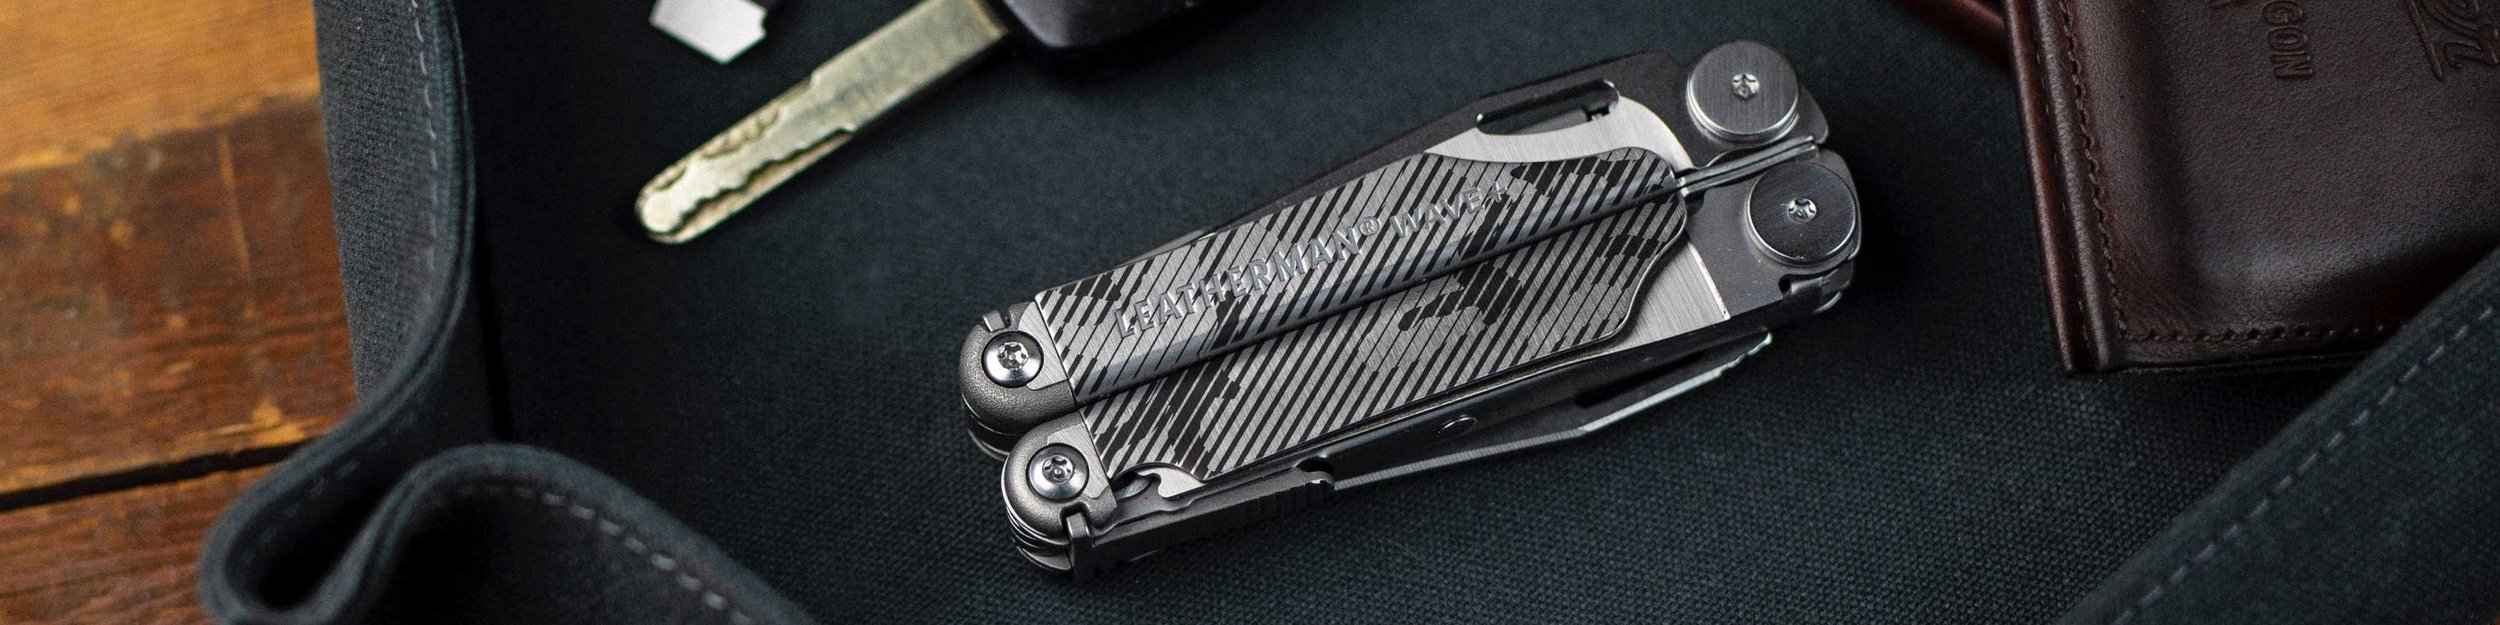 Leatherman Launches Custom Shop In Canada — Traversing